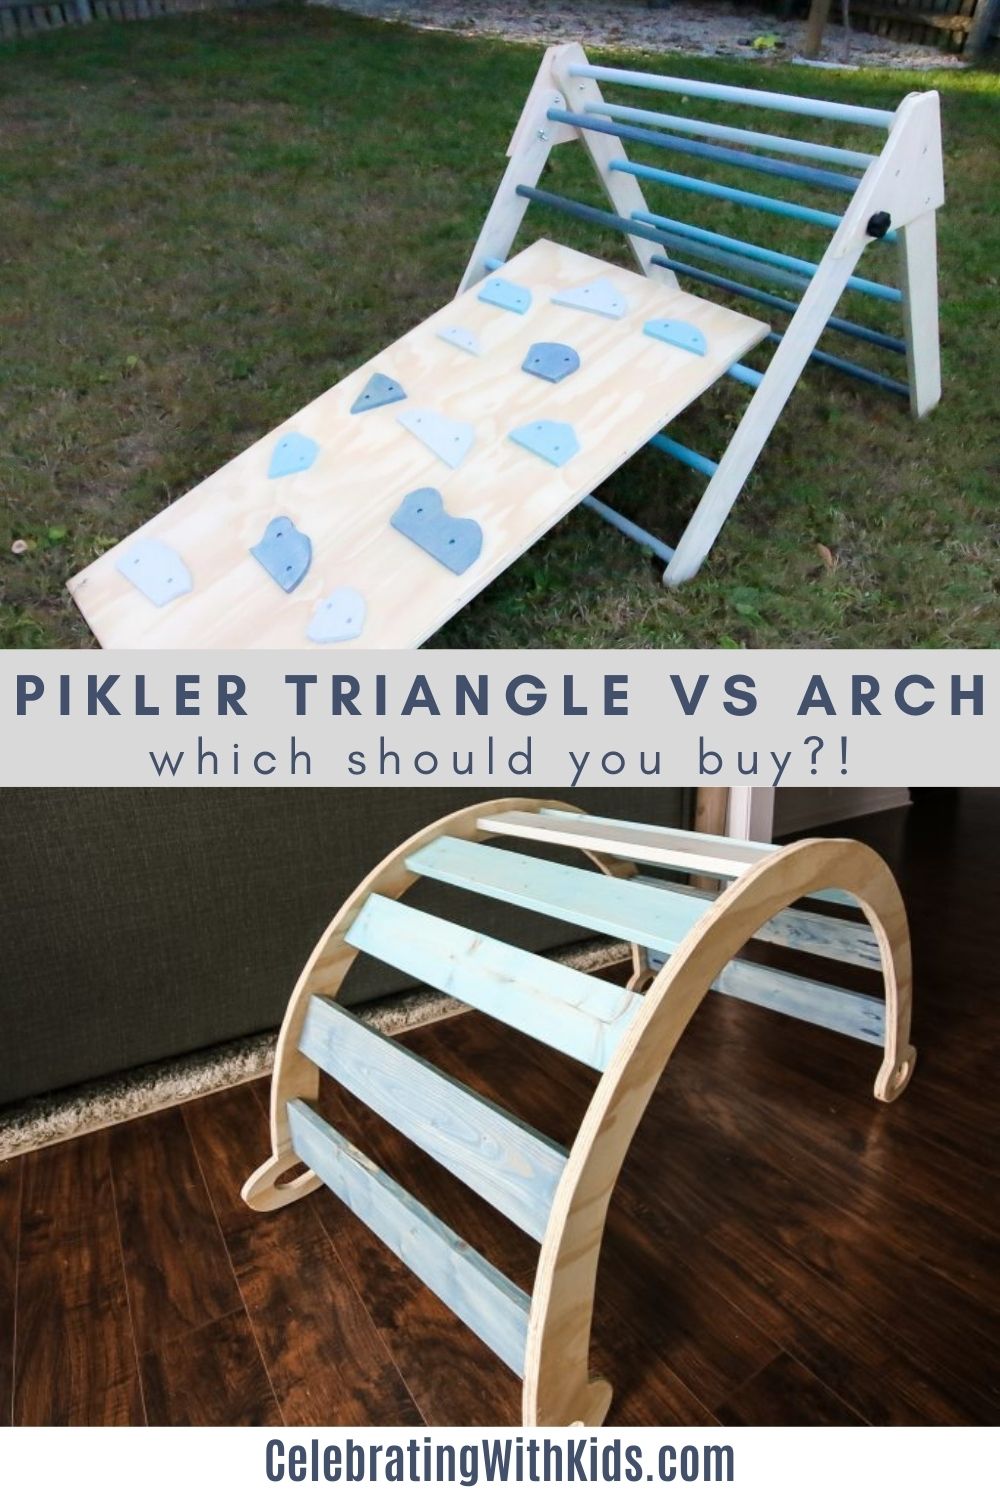 Buy Pikler Triangle, Ramp, Arch